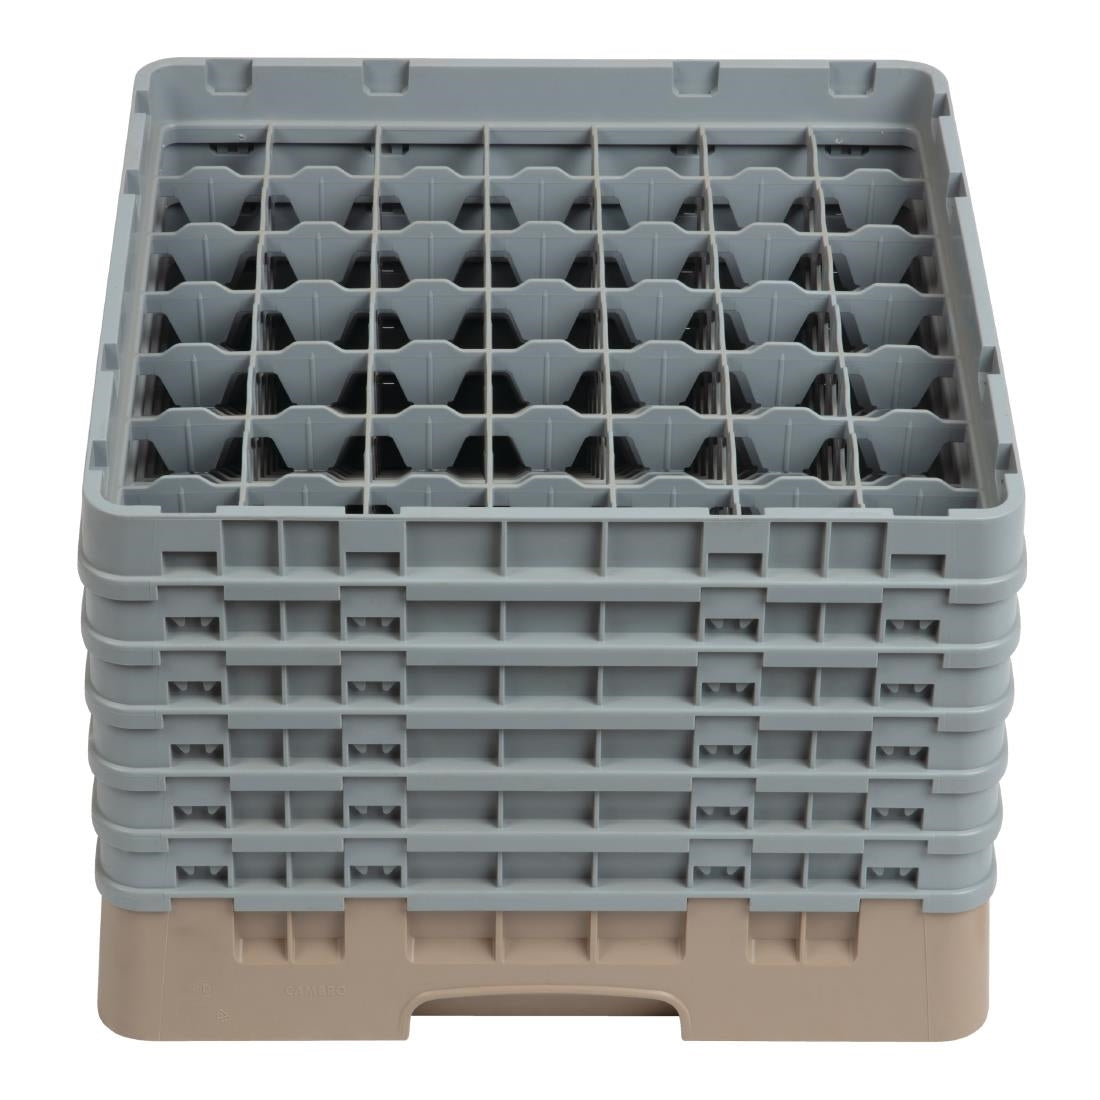 Cambro Camrack Beige 49 Compartments Max Glass Height 298mm JD Catering Equipment Solutions Ltd